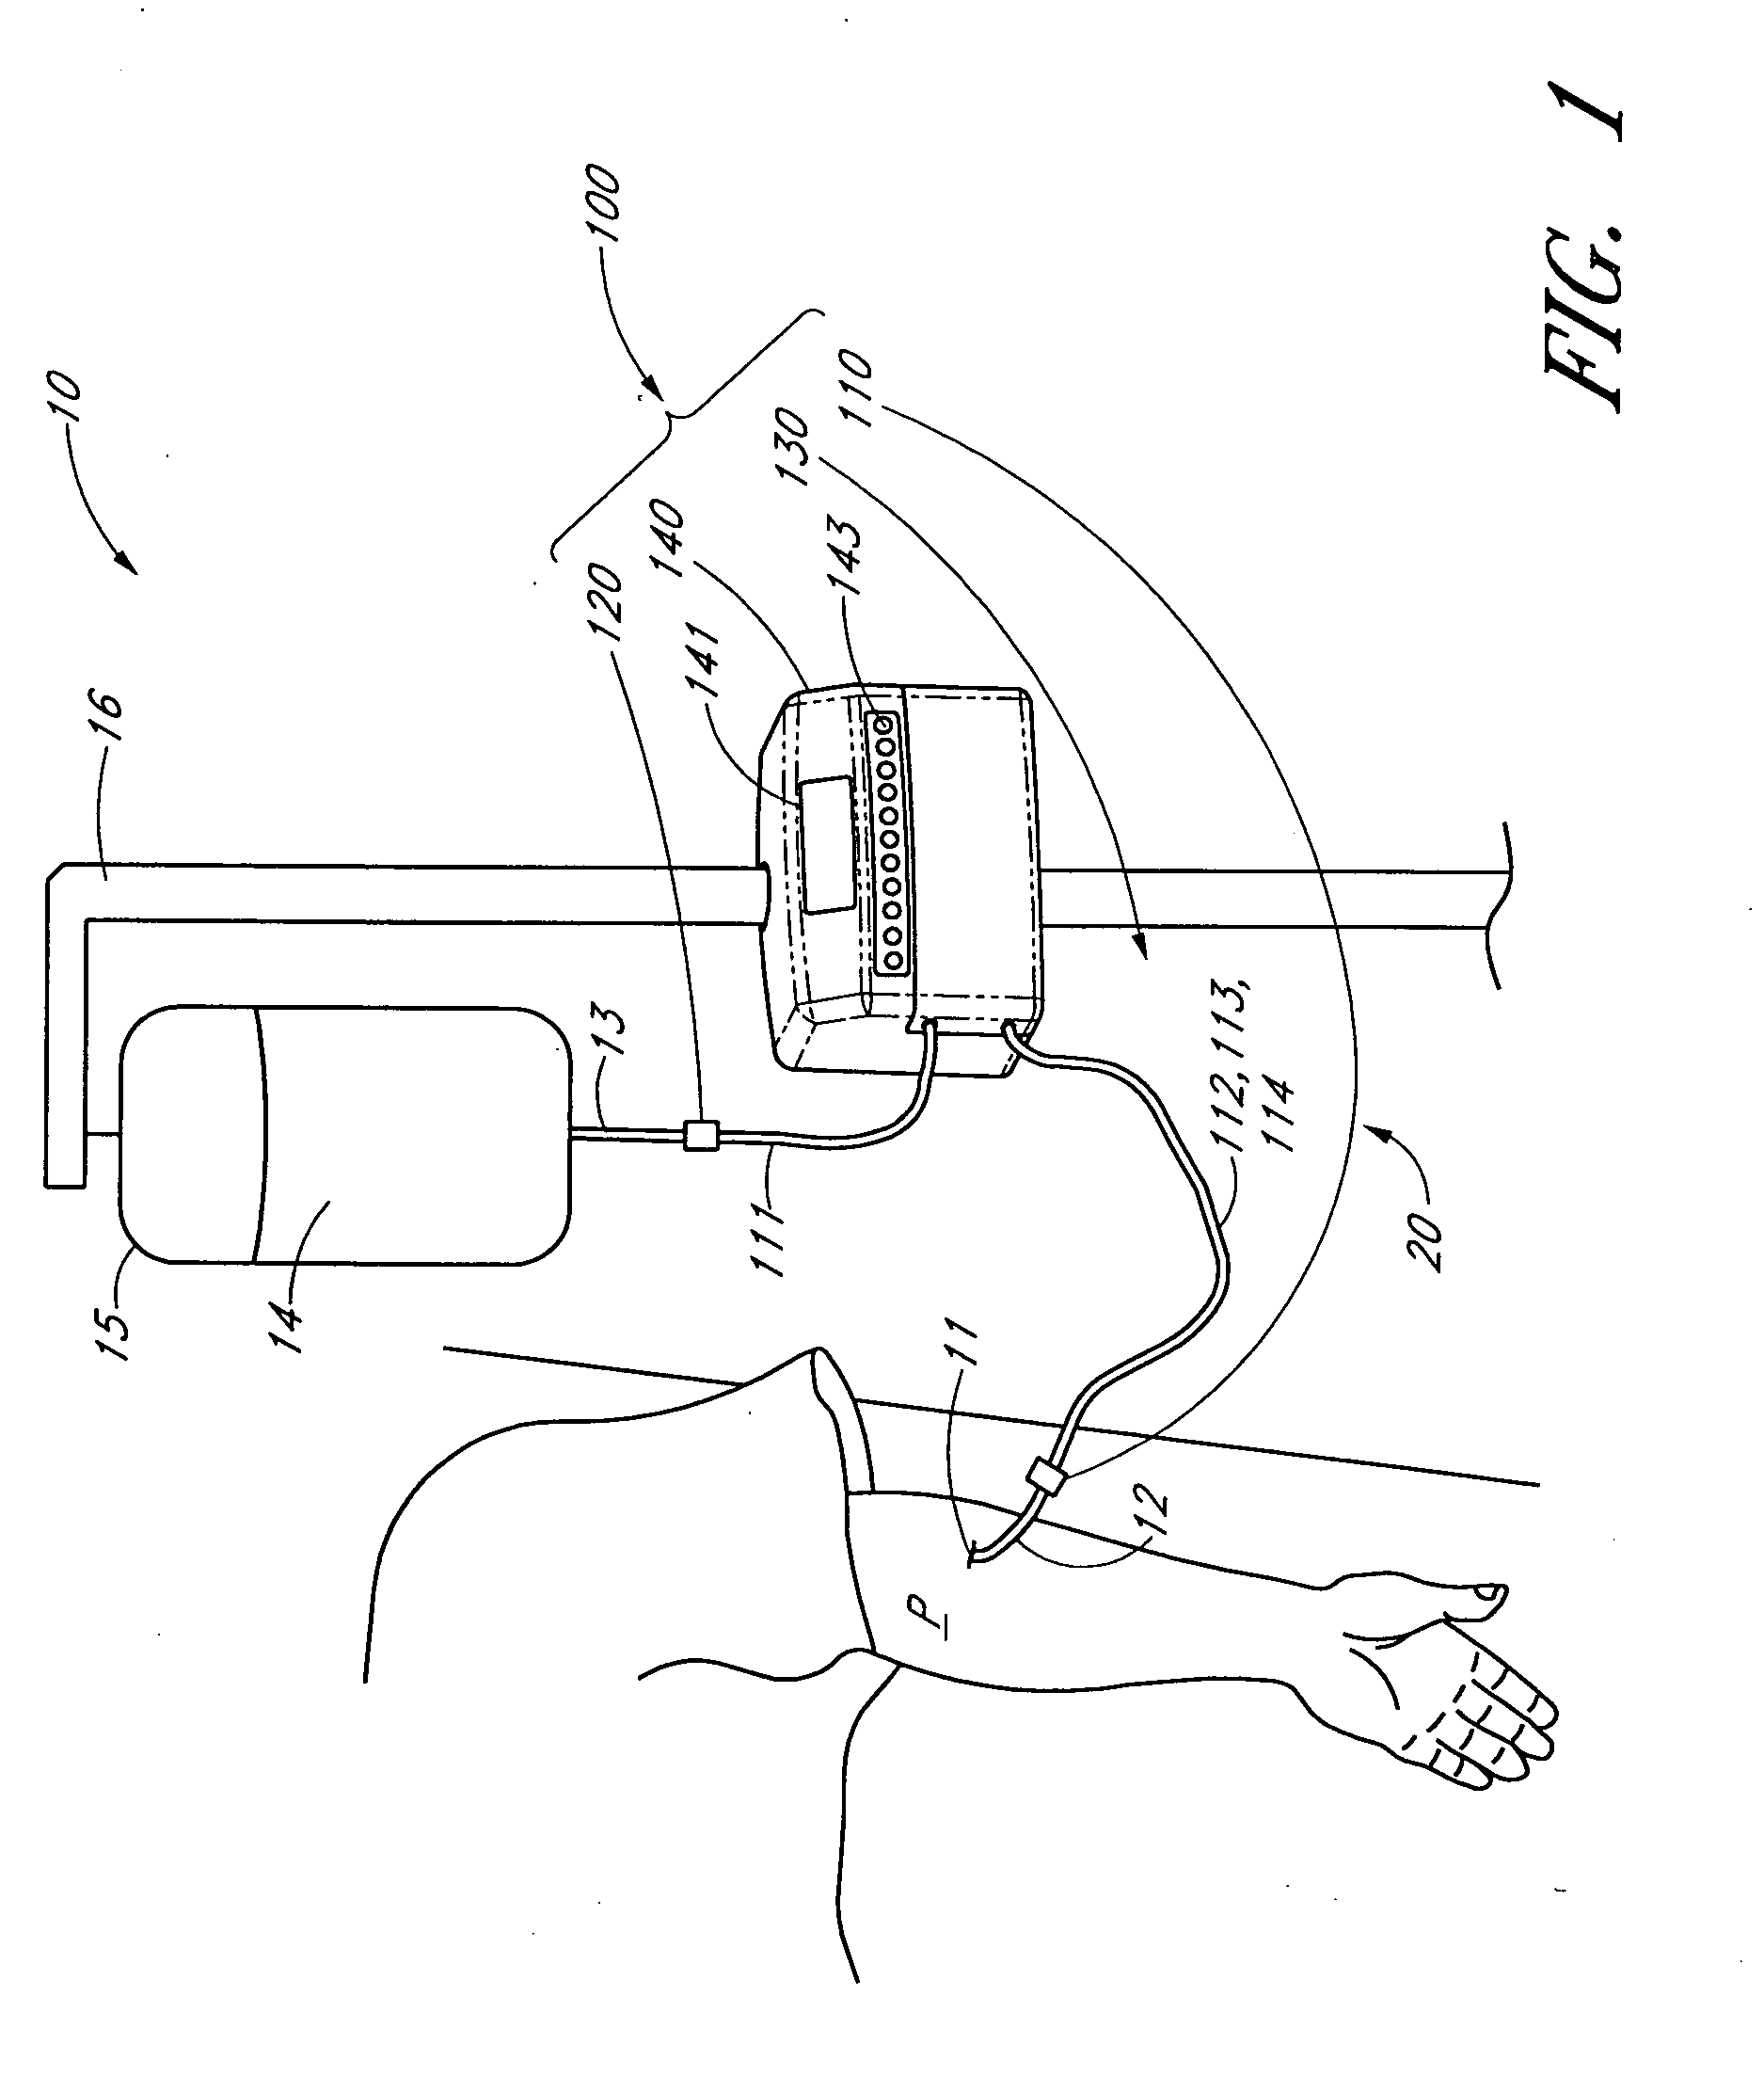 Methods and apparatus for extracting and analyzing a bodily fluid